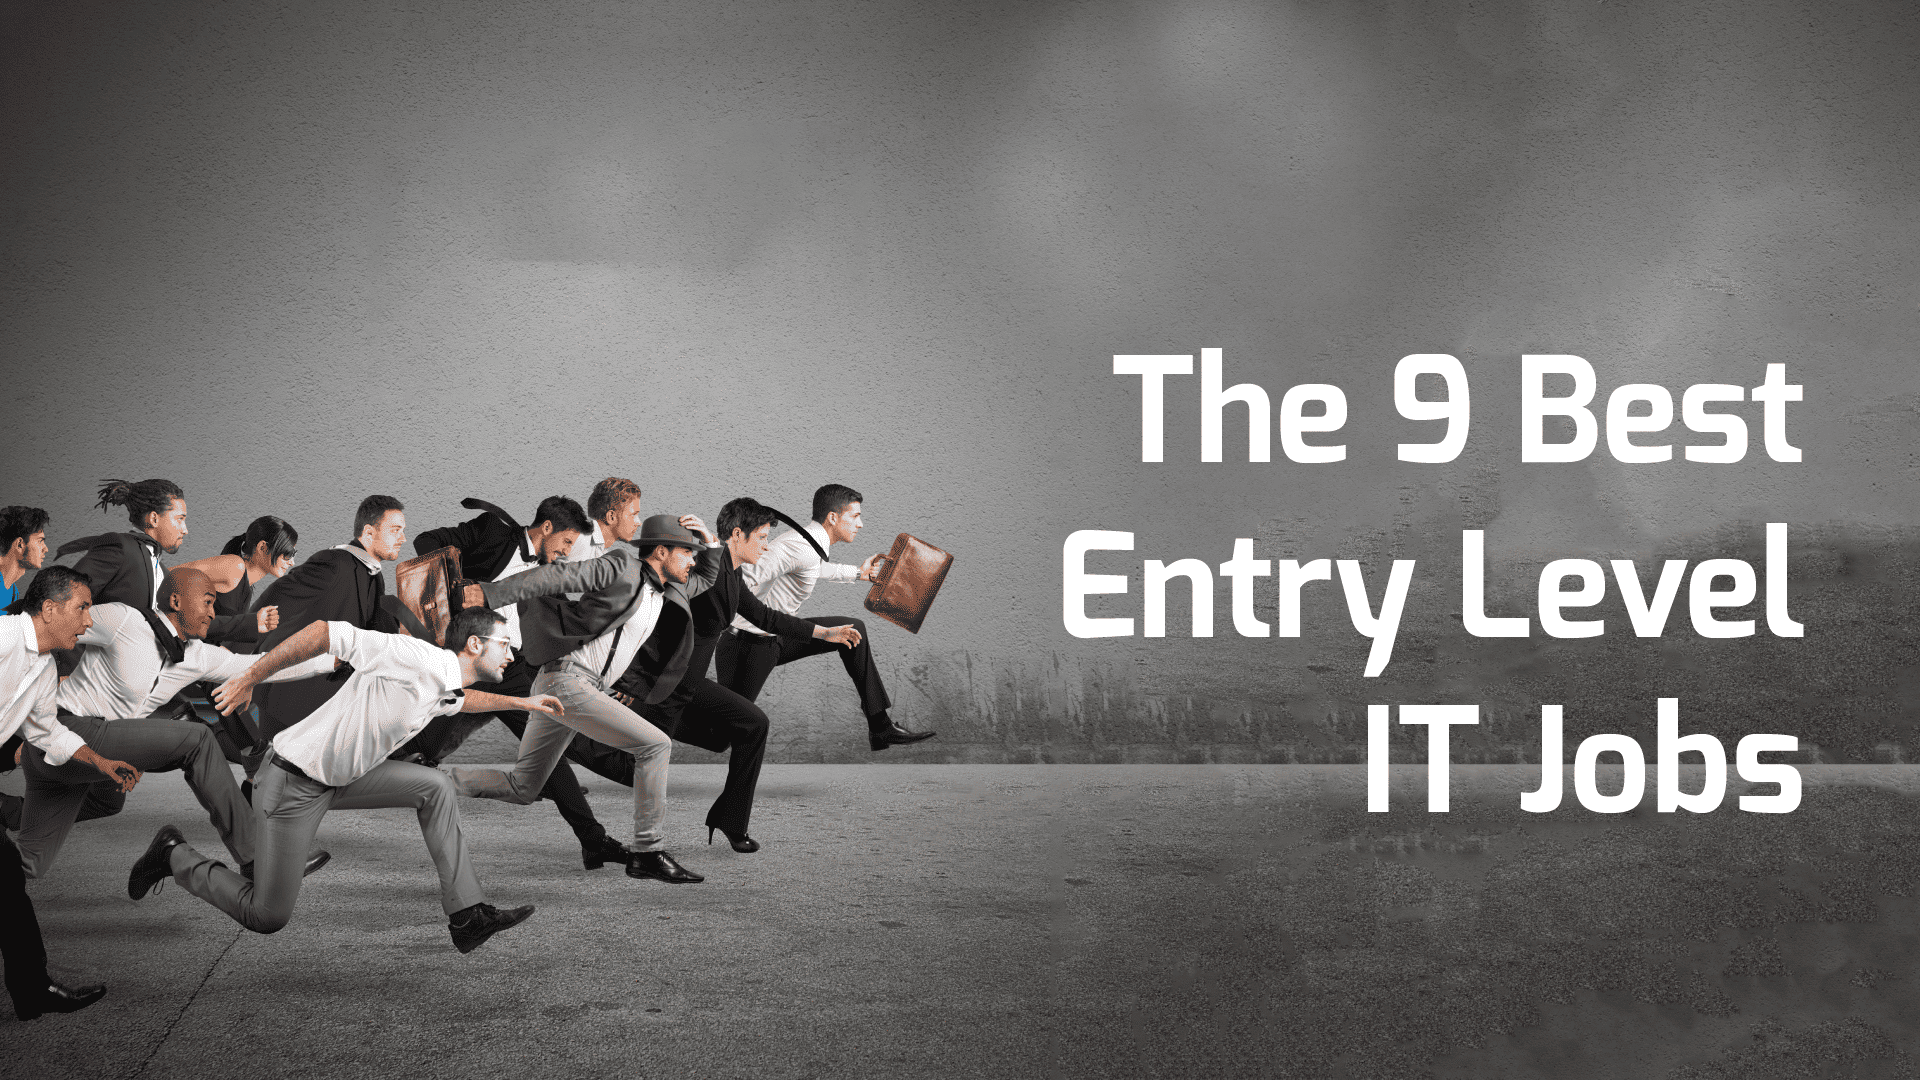 The 9 Best Entry Level IT Jobs